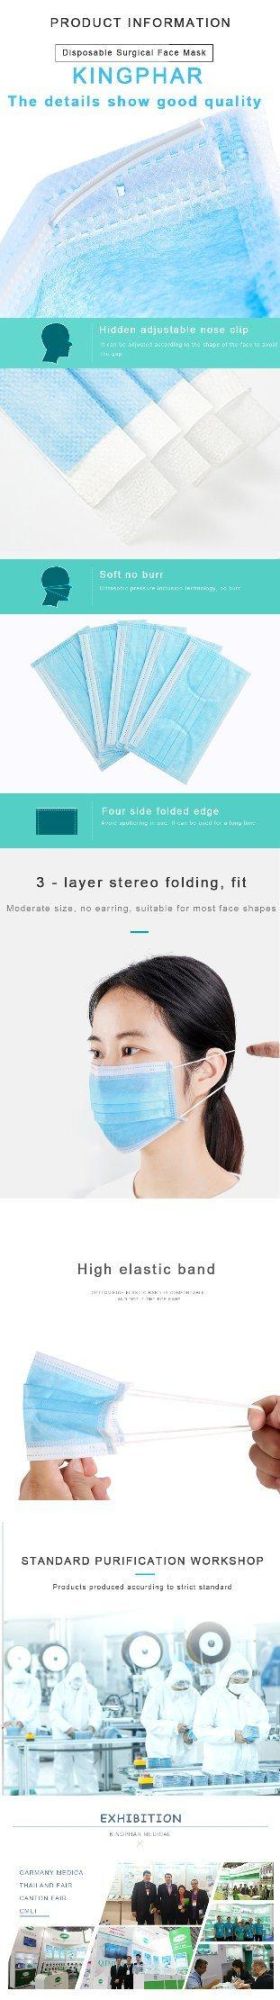 Disposable 3layers Medical Face Mask Type Iir with ISO13485 En14683 Yy0469 Approval Standard